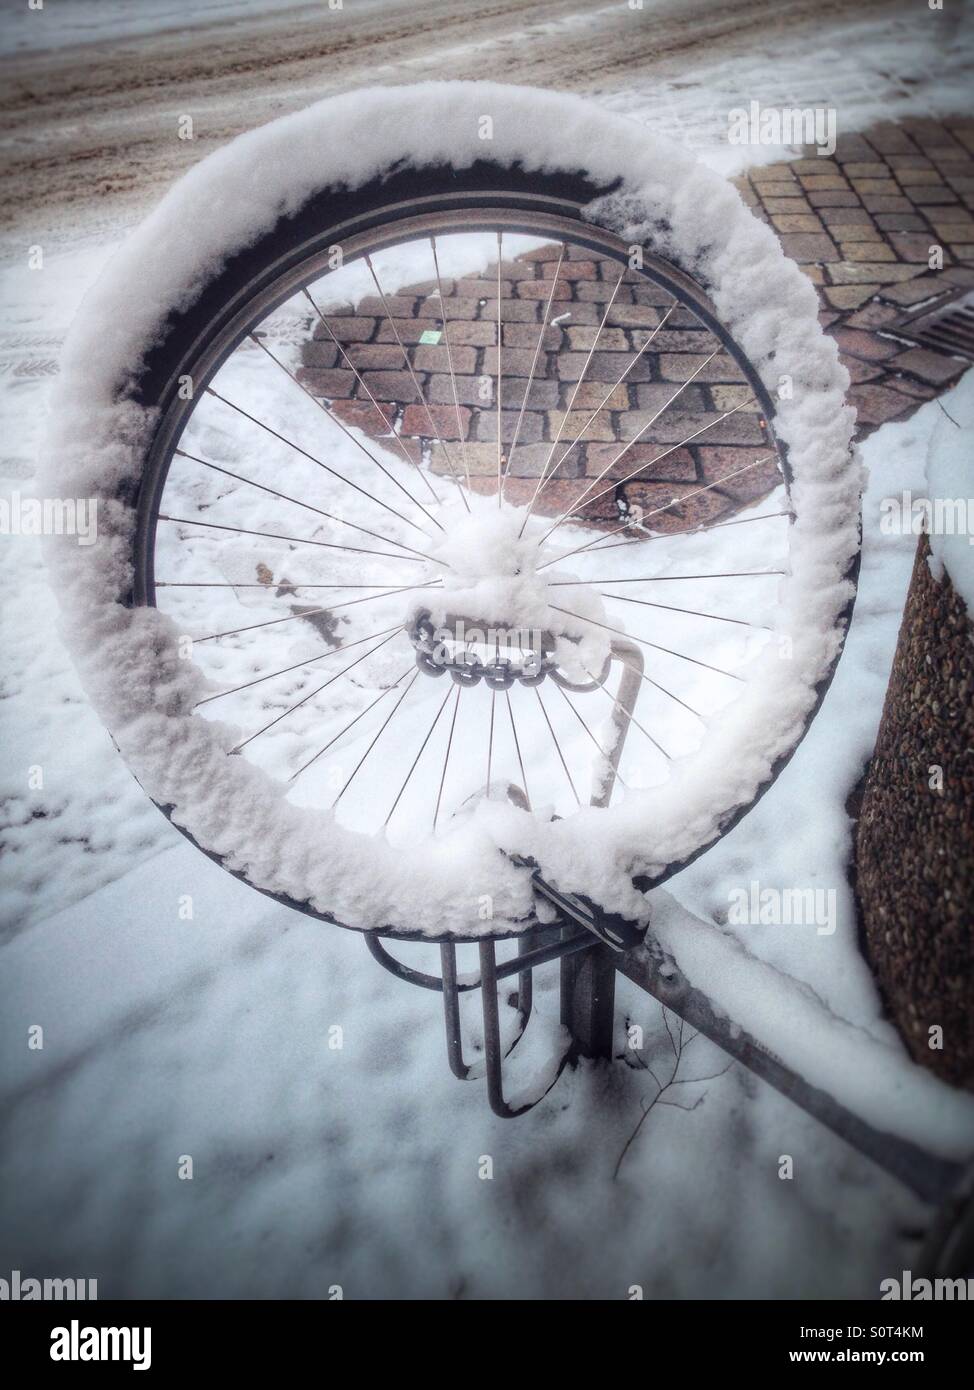 A bike wheel of a stolen bike left on a bicycle parking rack covered in snow, Berlin, Germany Stock Photo